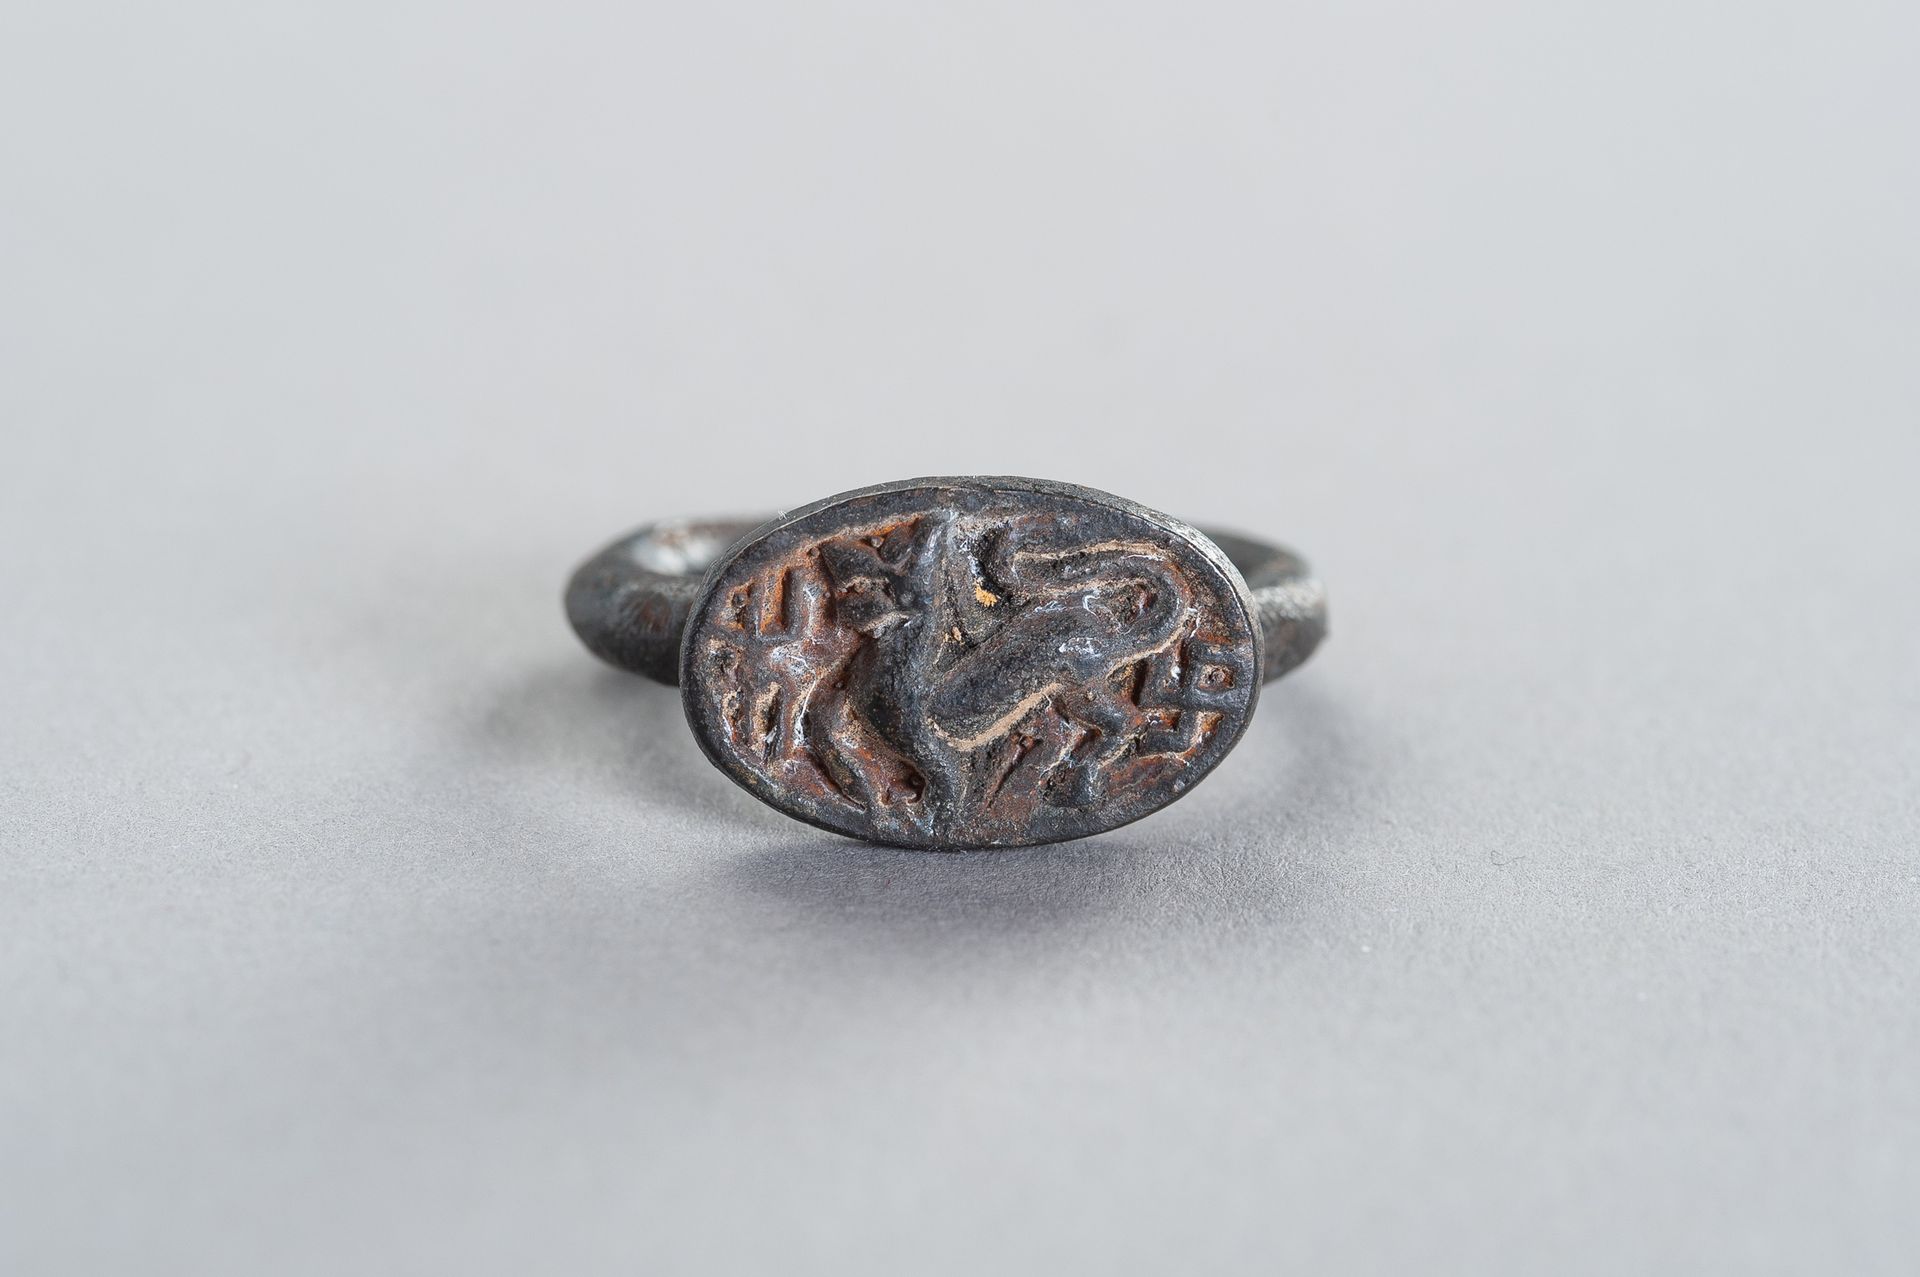 A BRONZE INTAGLIO RING DEPICTING A MYTHICAL BEAST INTAGLIO-RING AUS BRONZE MIT D&hellip;